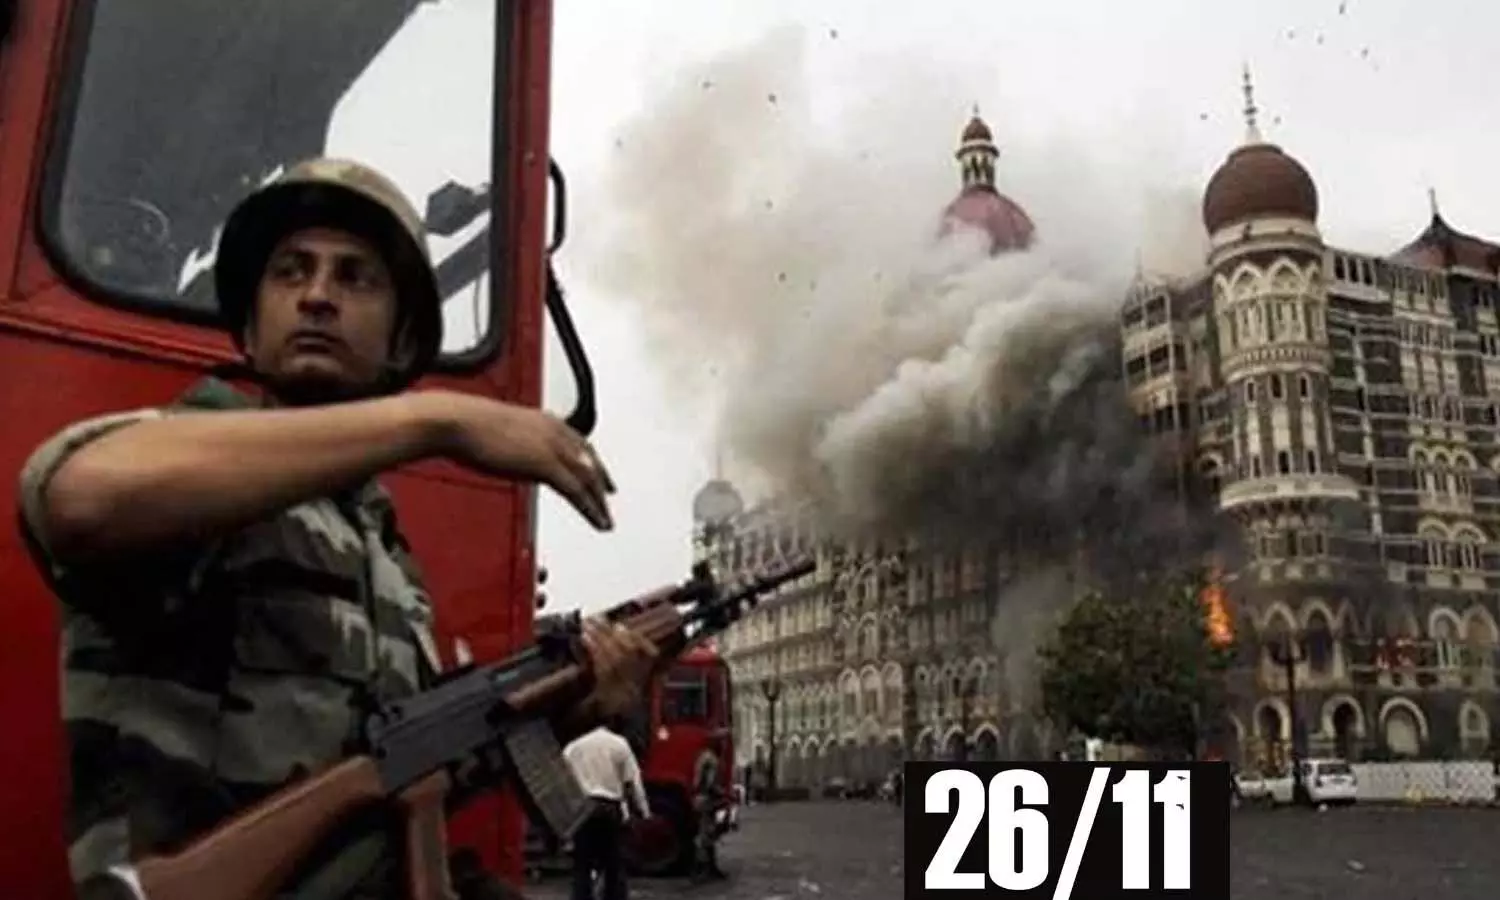 Mumbai 26/11: Mumbai attack convicts: These are the enemies of the country who are still away from bars